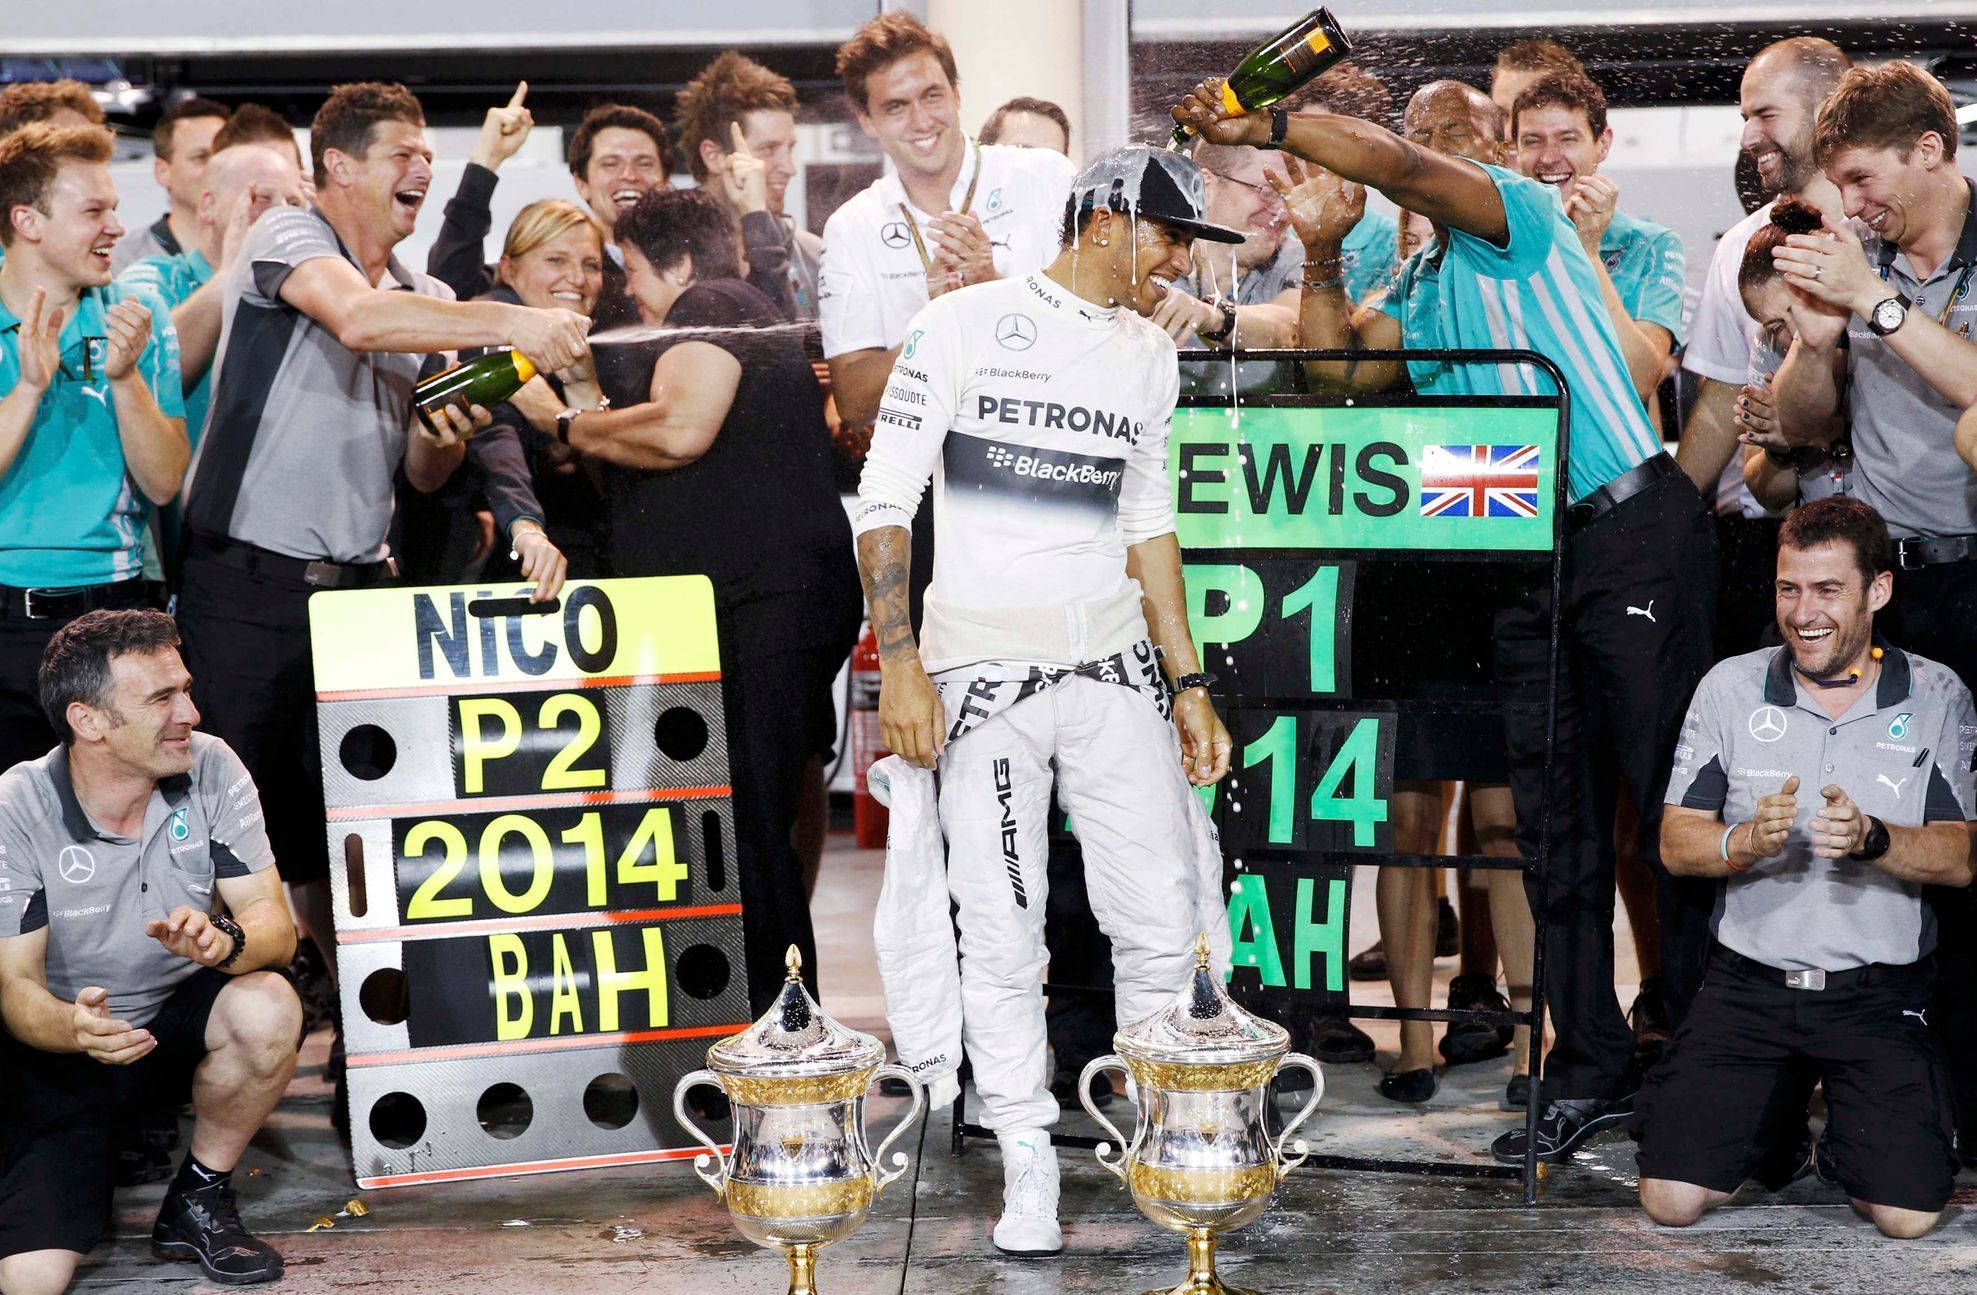 Mercedes Formula One driver Lewis Hamilton of Britain is sprayed with champagne by his team after his win in the Bahrain F1 Grand Prix at the Bahrain International Circuit (BIC) in Sakhir